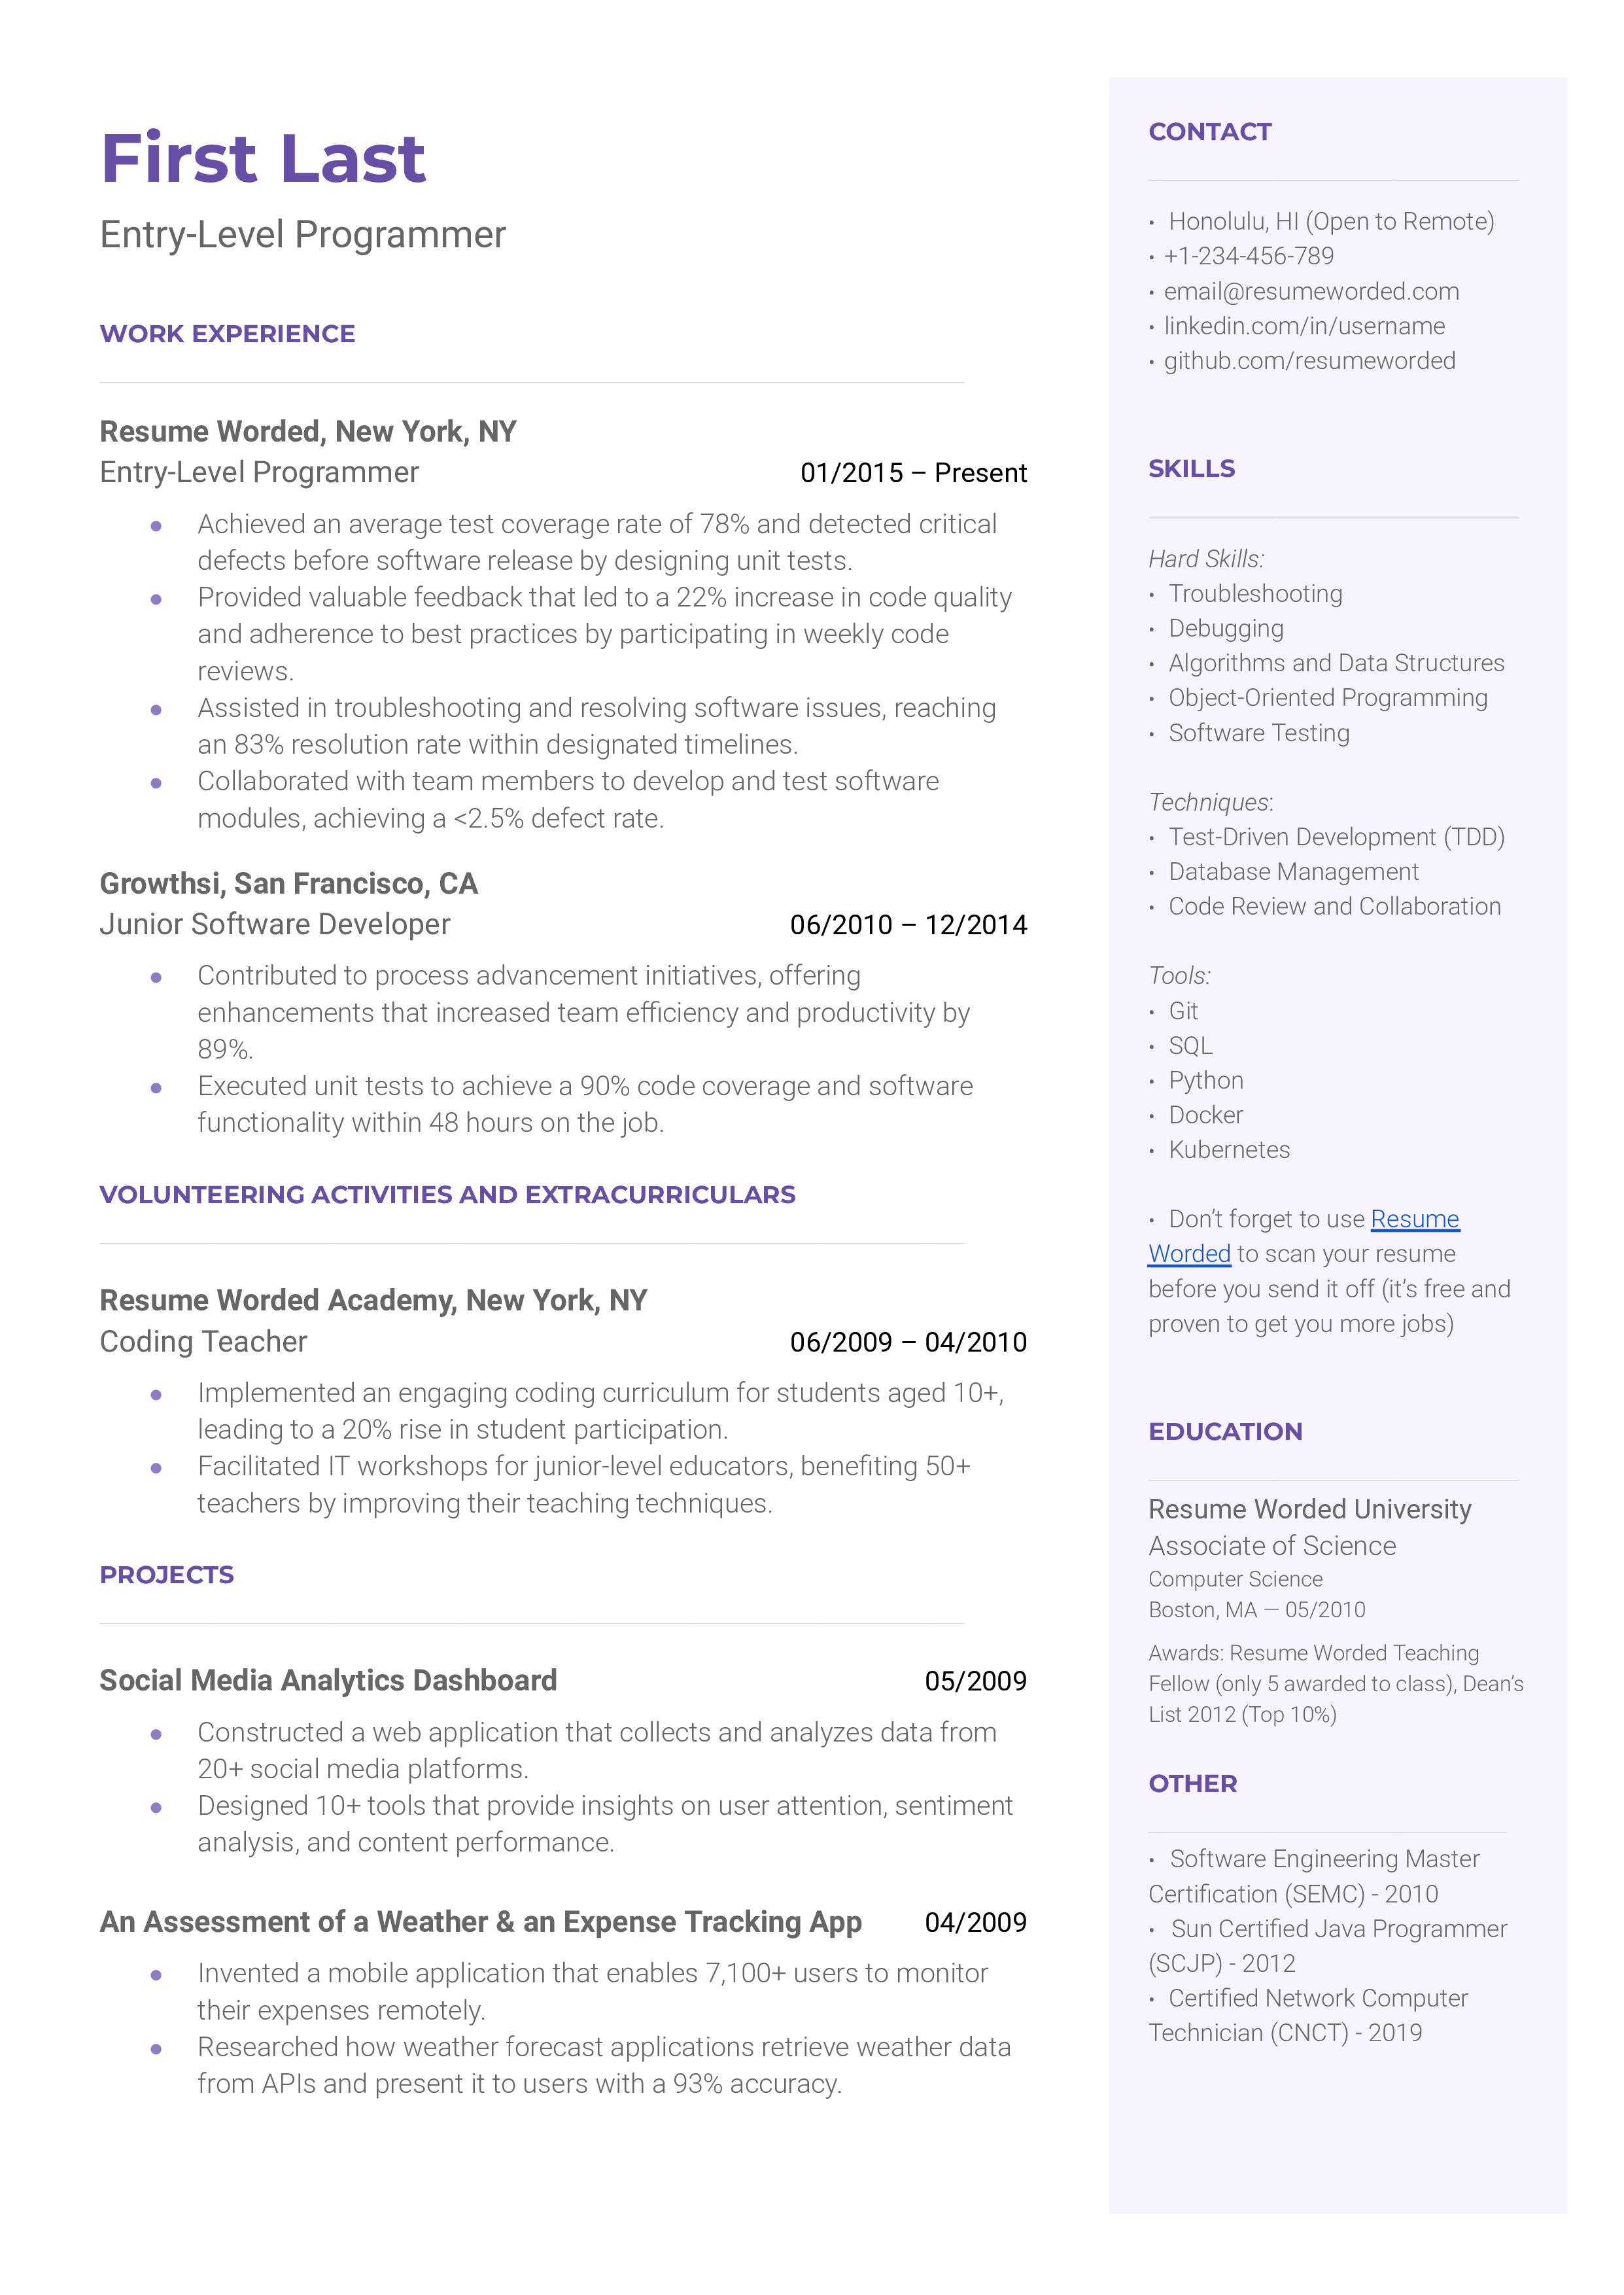 Screenshot of a CV for an entry-level programming role with emphasis on projects and certifications.